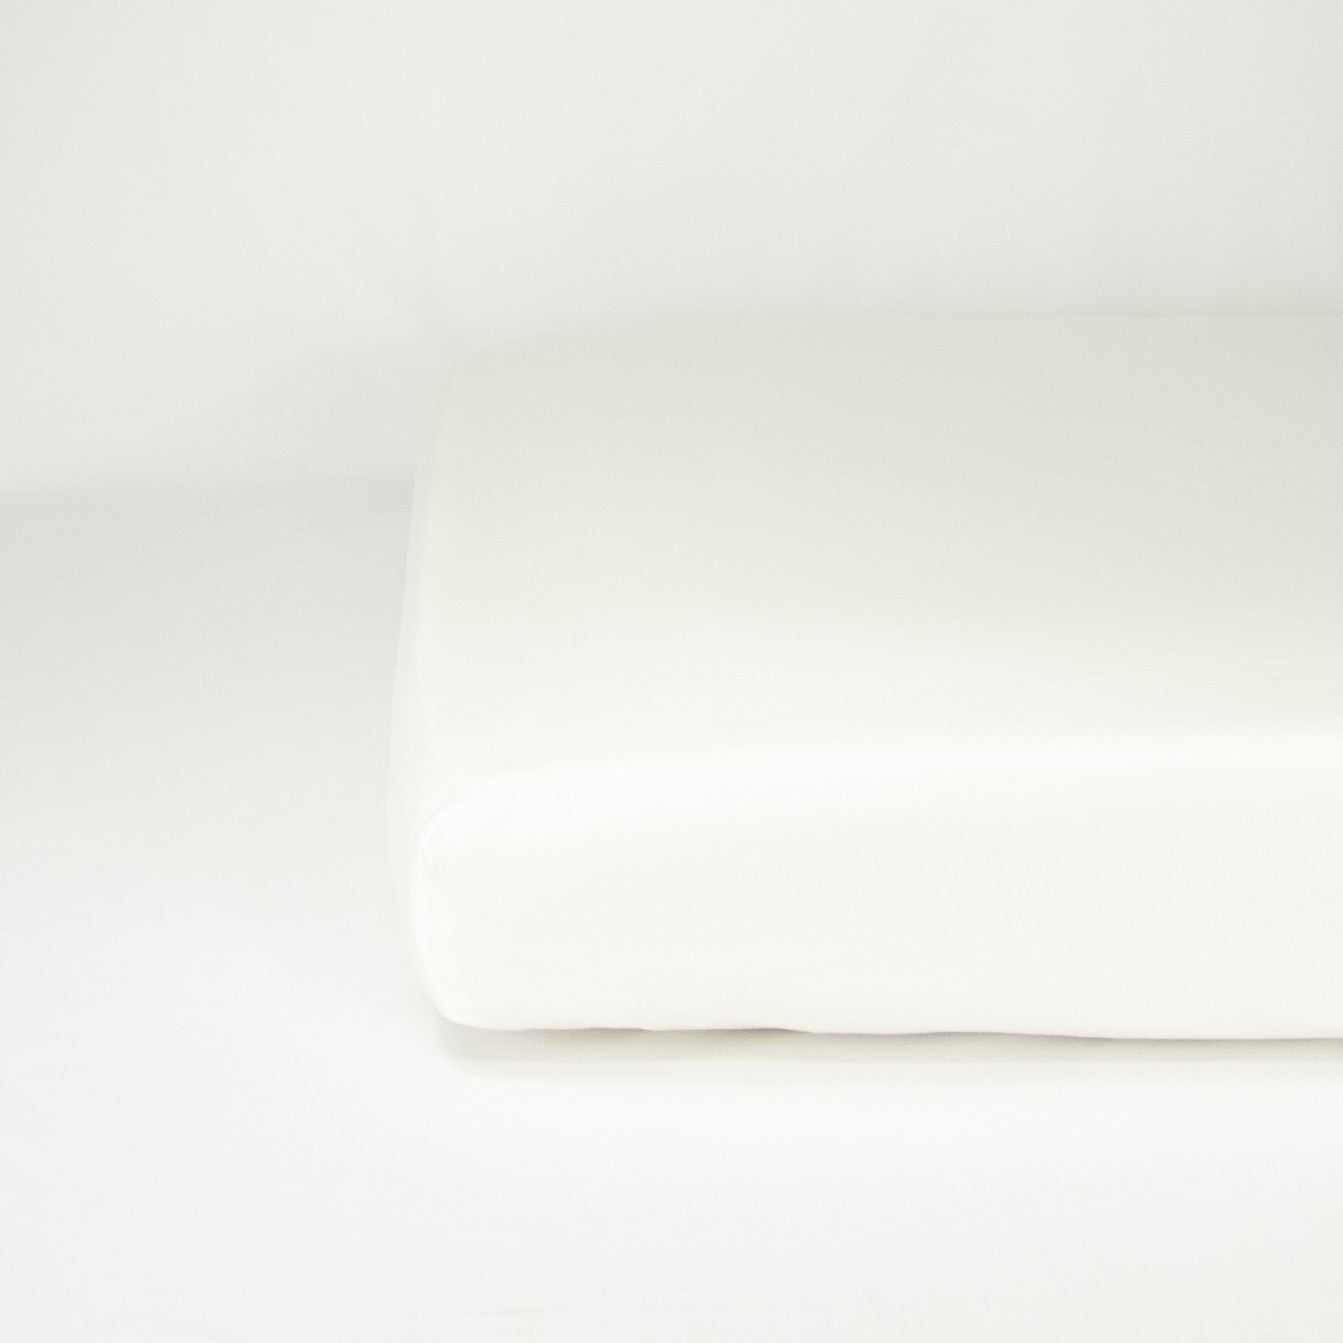 End of mattress with organic cotton fitted cot sheet in warm white